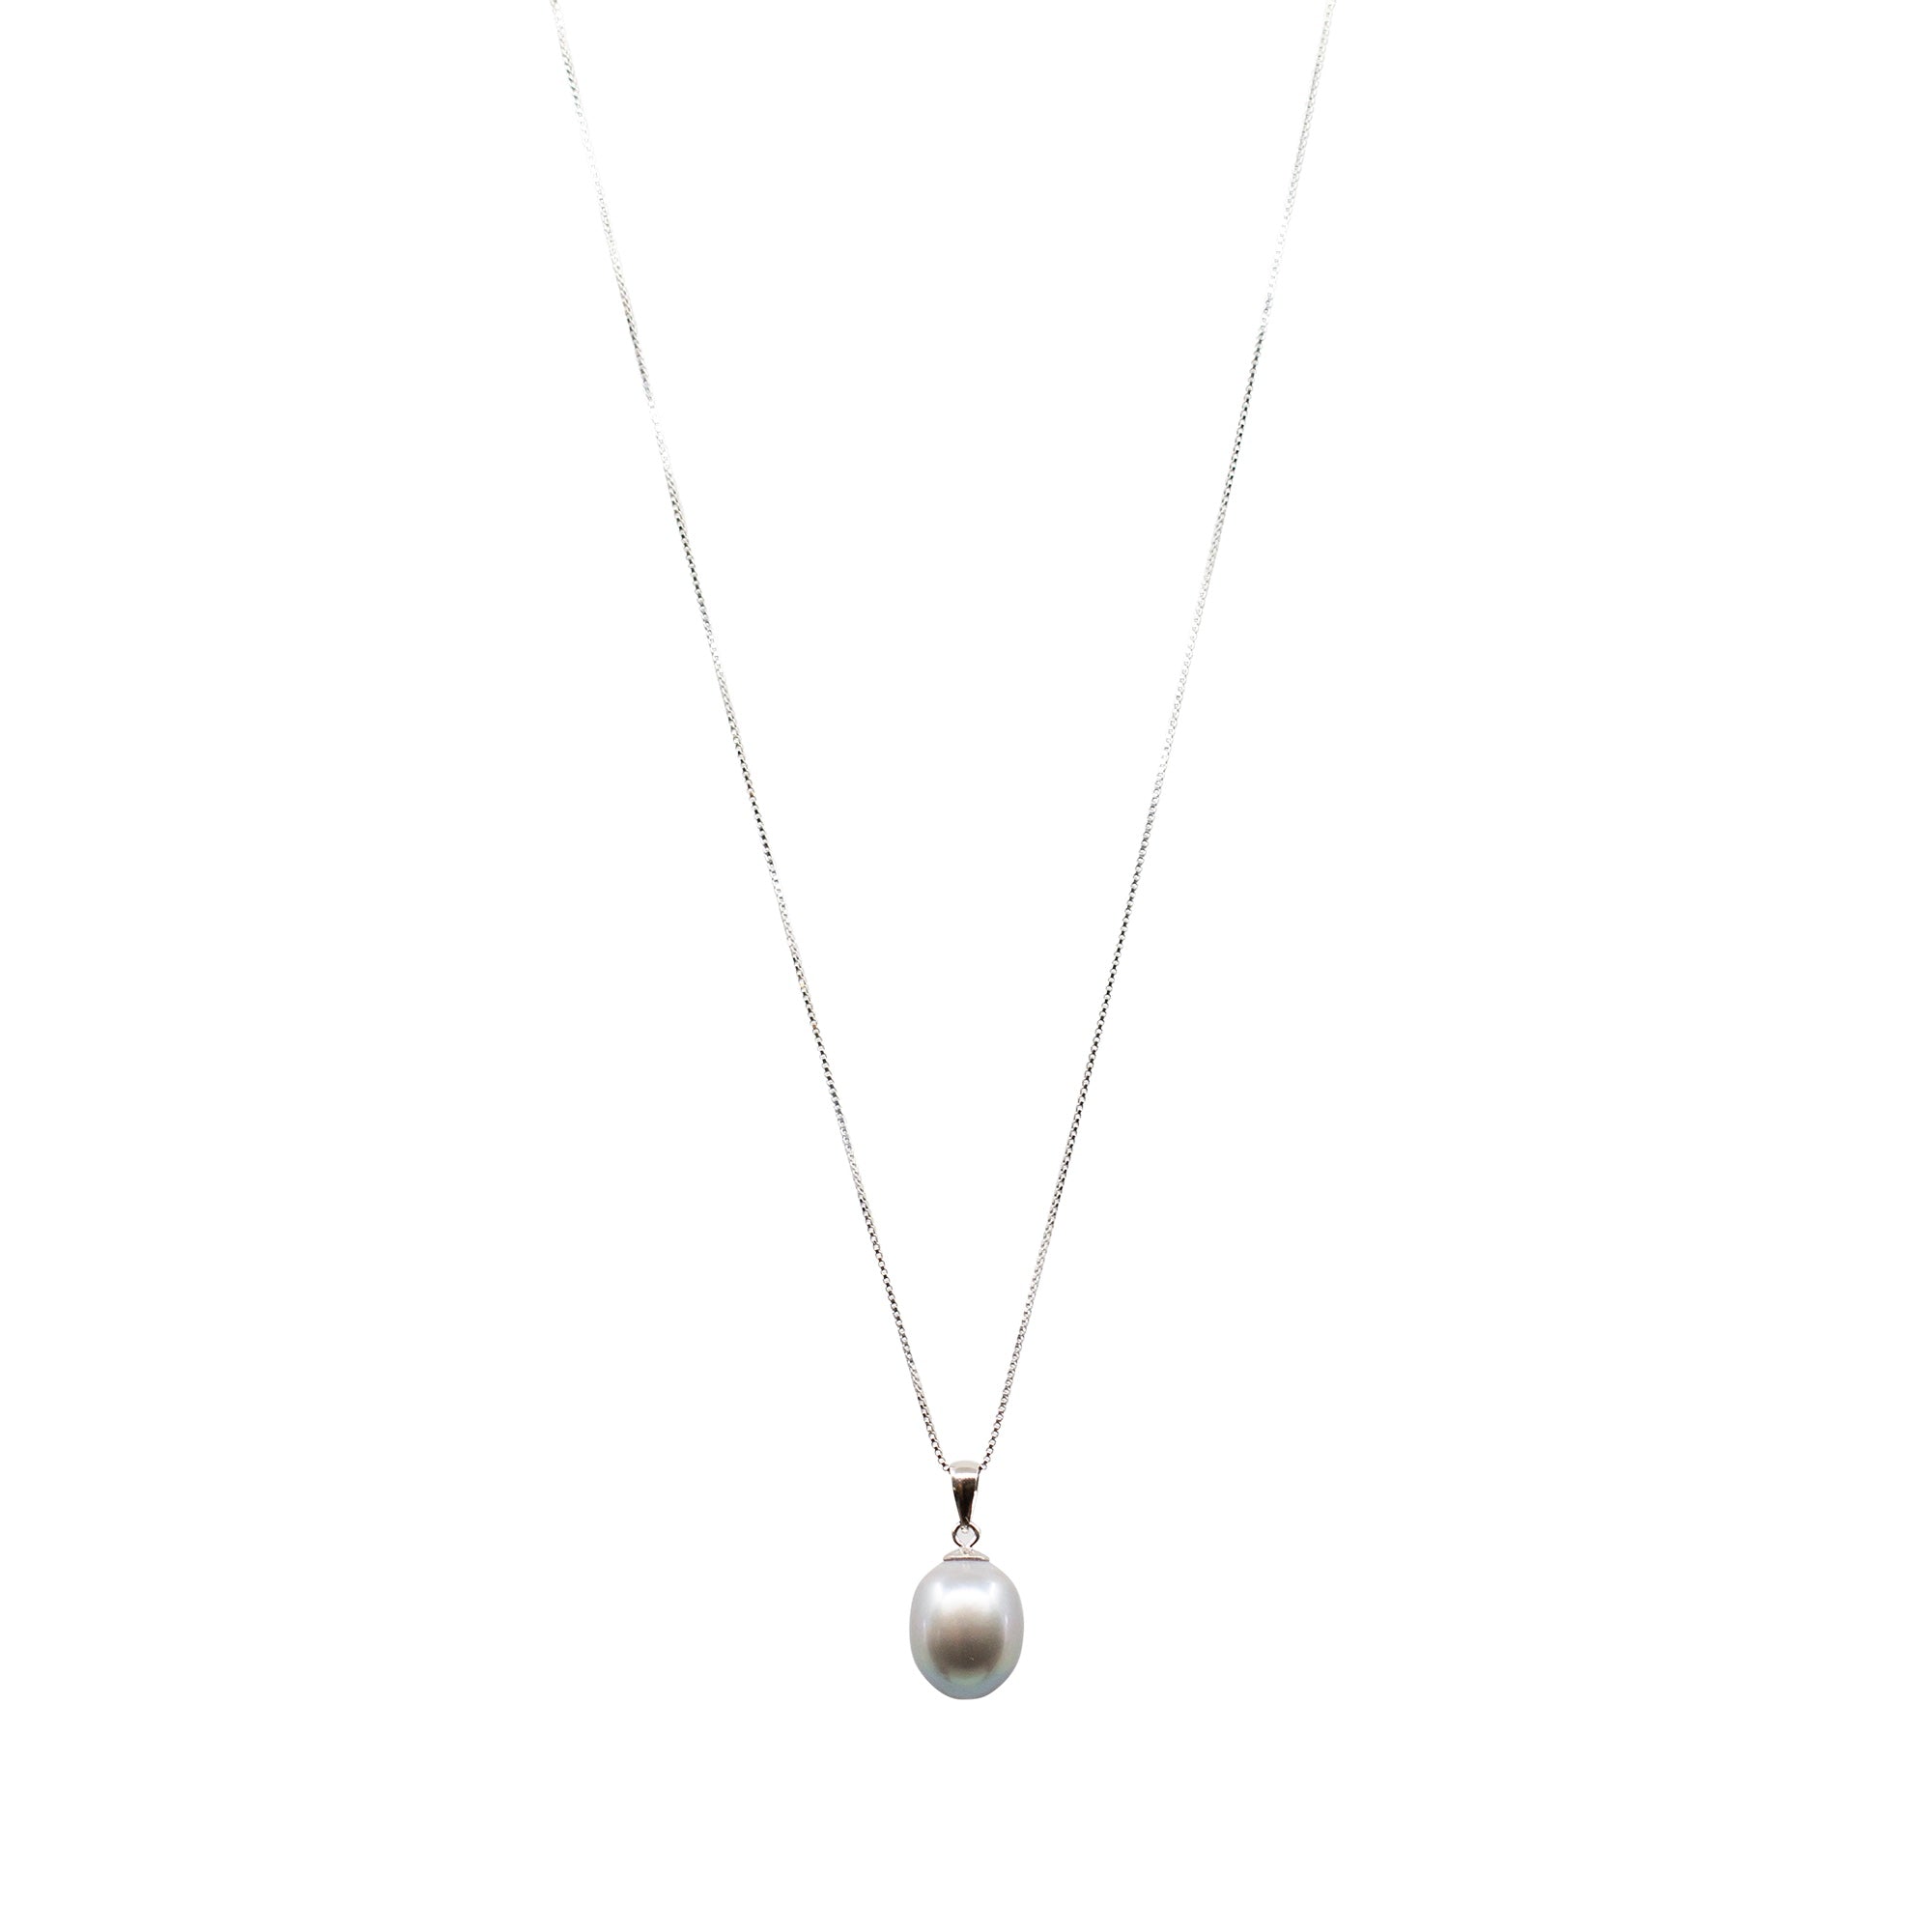 Single Floating Pearl Choker Necklace with Sterling Silver Chain | MelJoy  Creations Jewelry